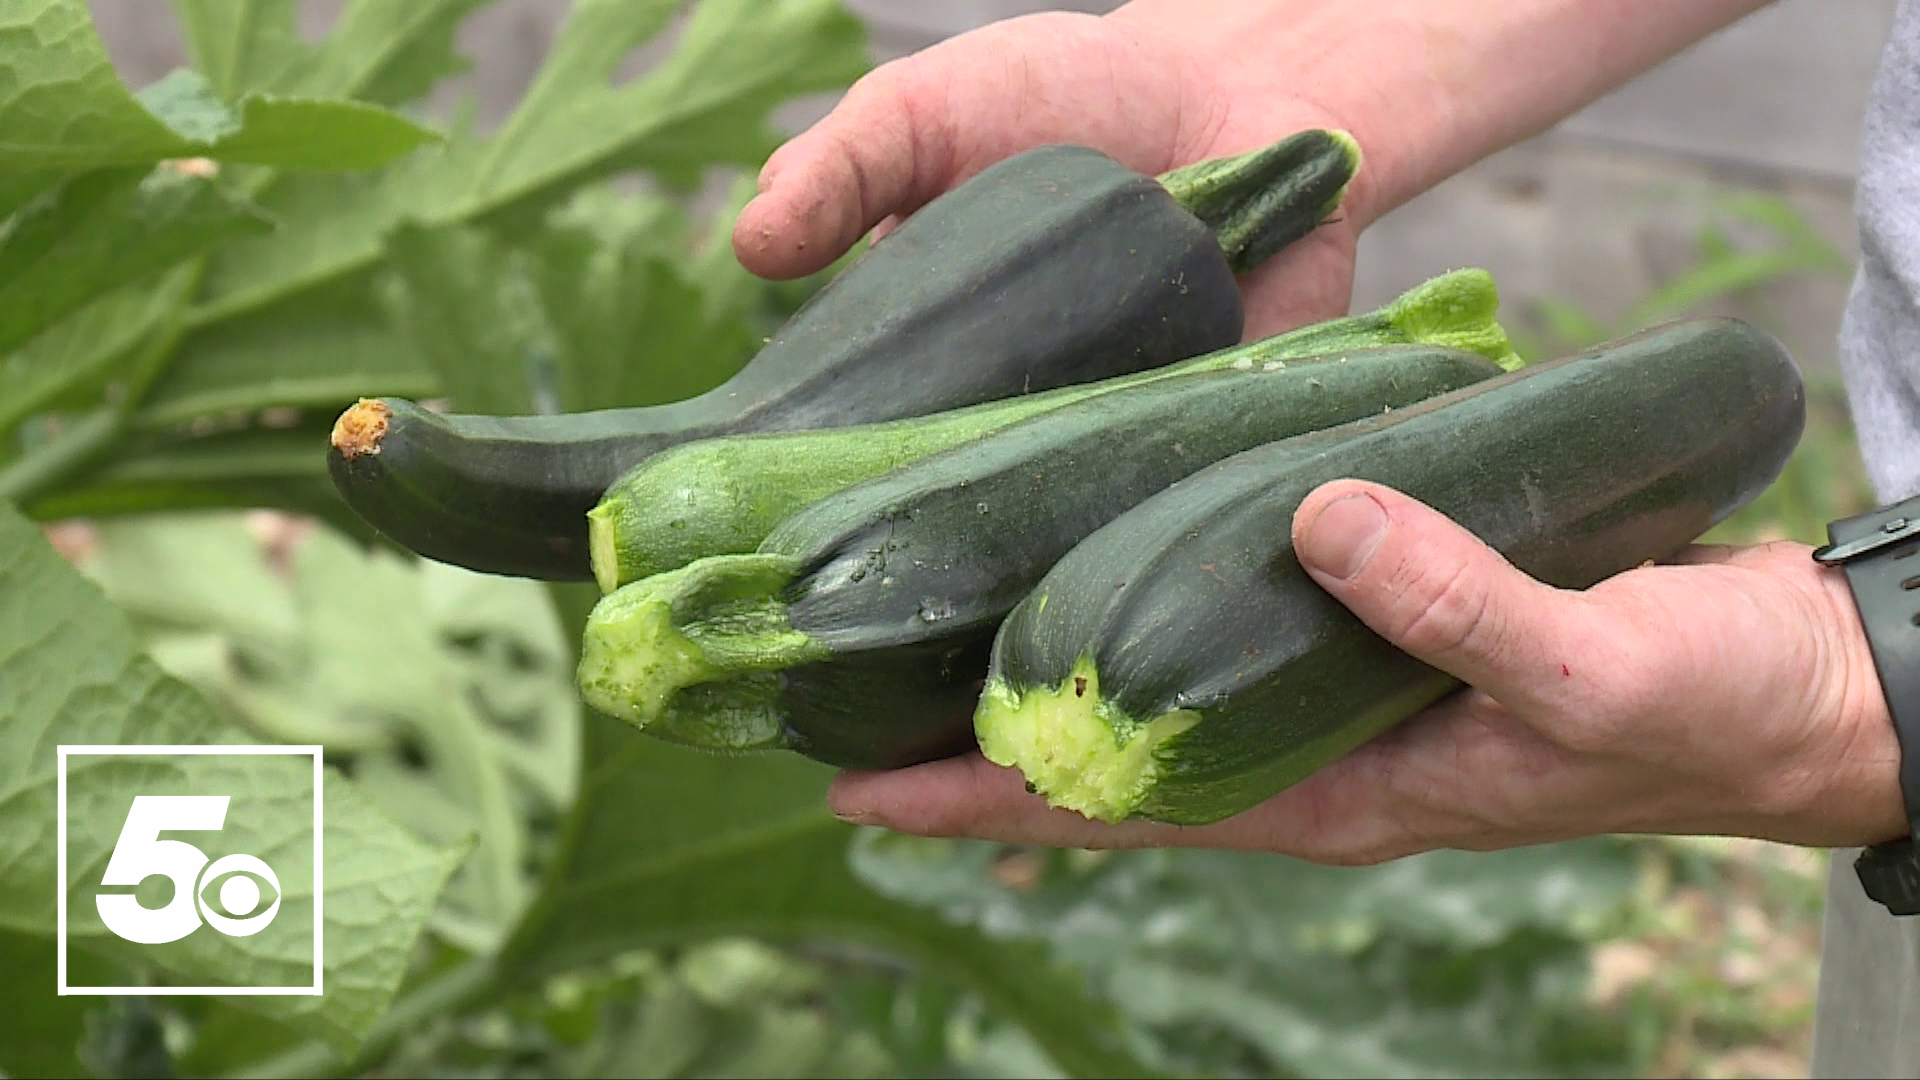 This week's 5NEWS Garden Club segment is all about harvesting your summer vegetables from your garden.